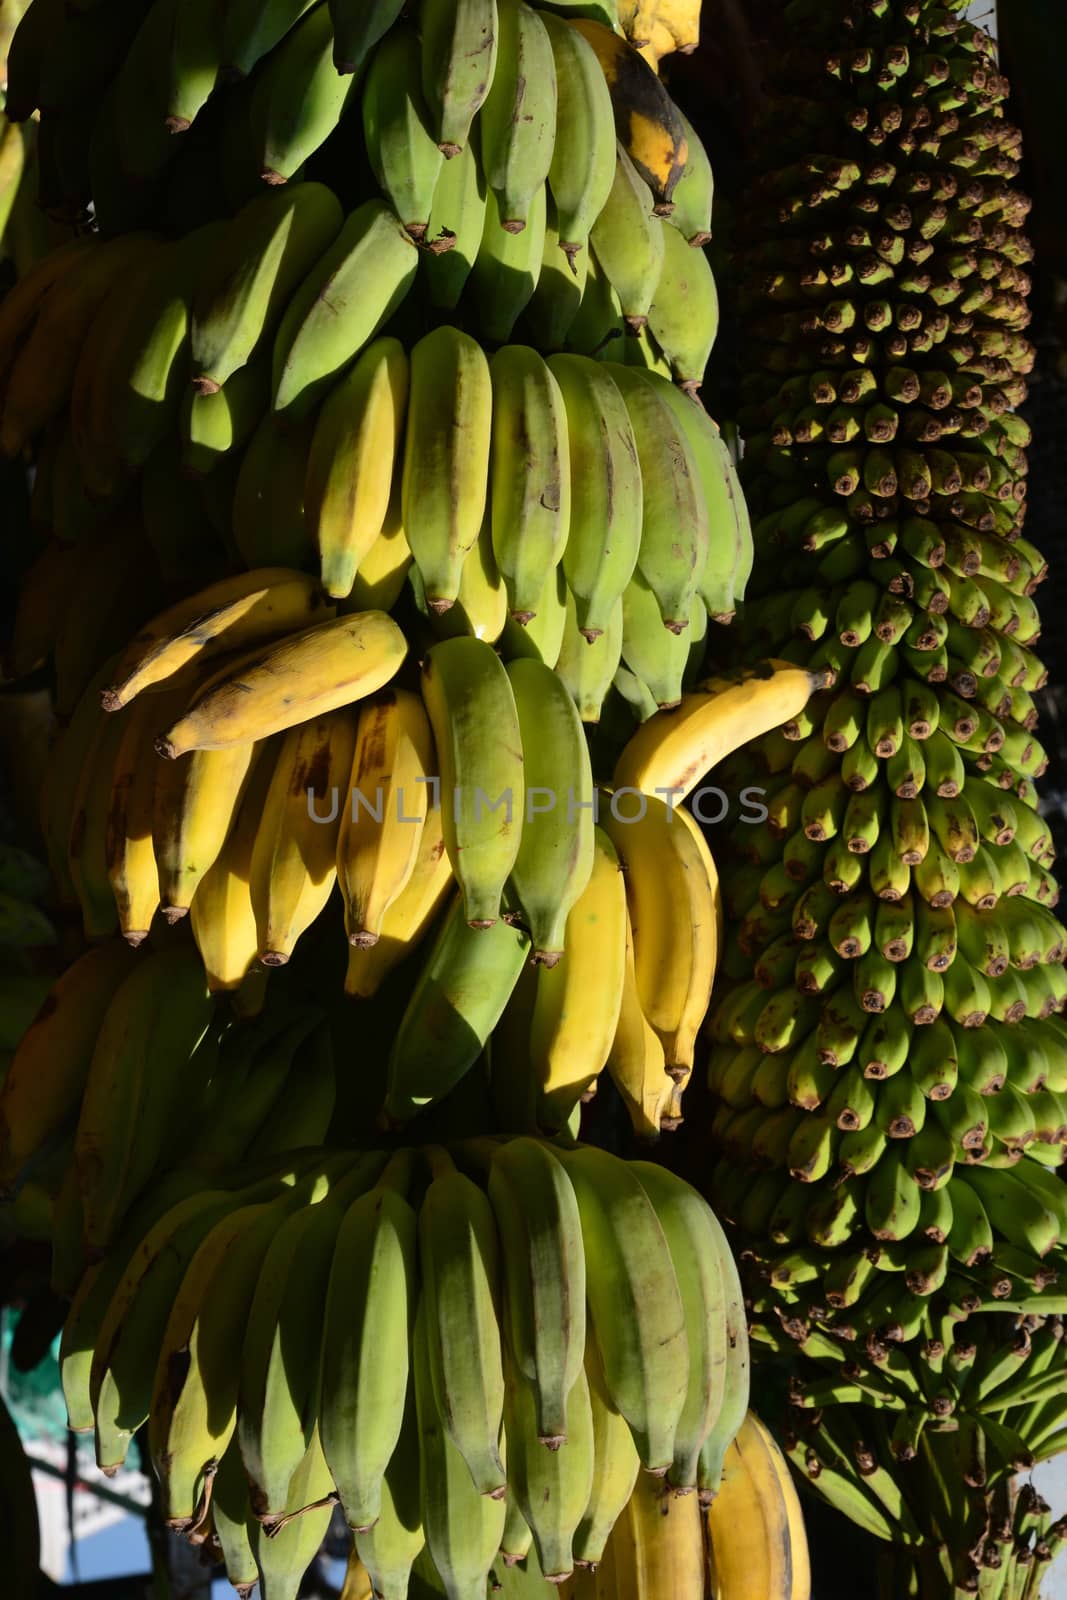 Bunch of  bananas in the banana garden by ideation90